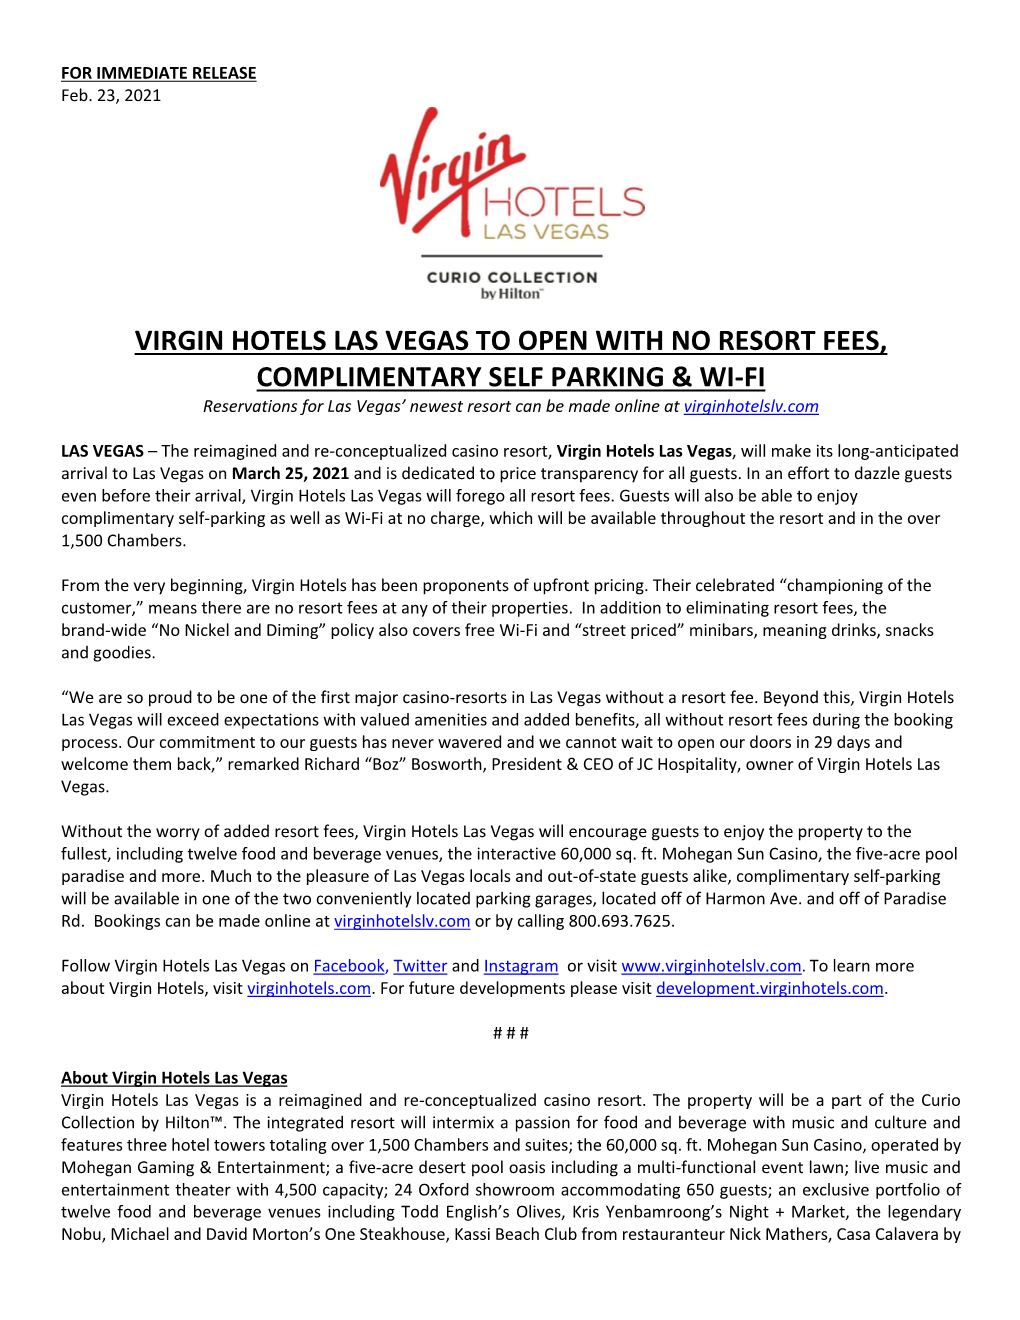 Virgin Hotels Las Vegas to Open with No Resort Fees